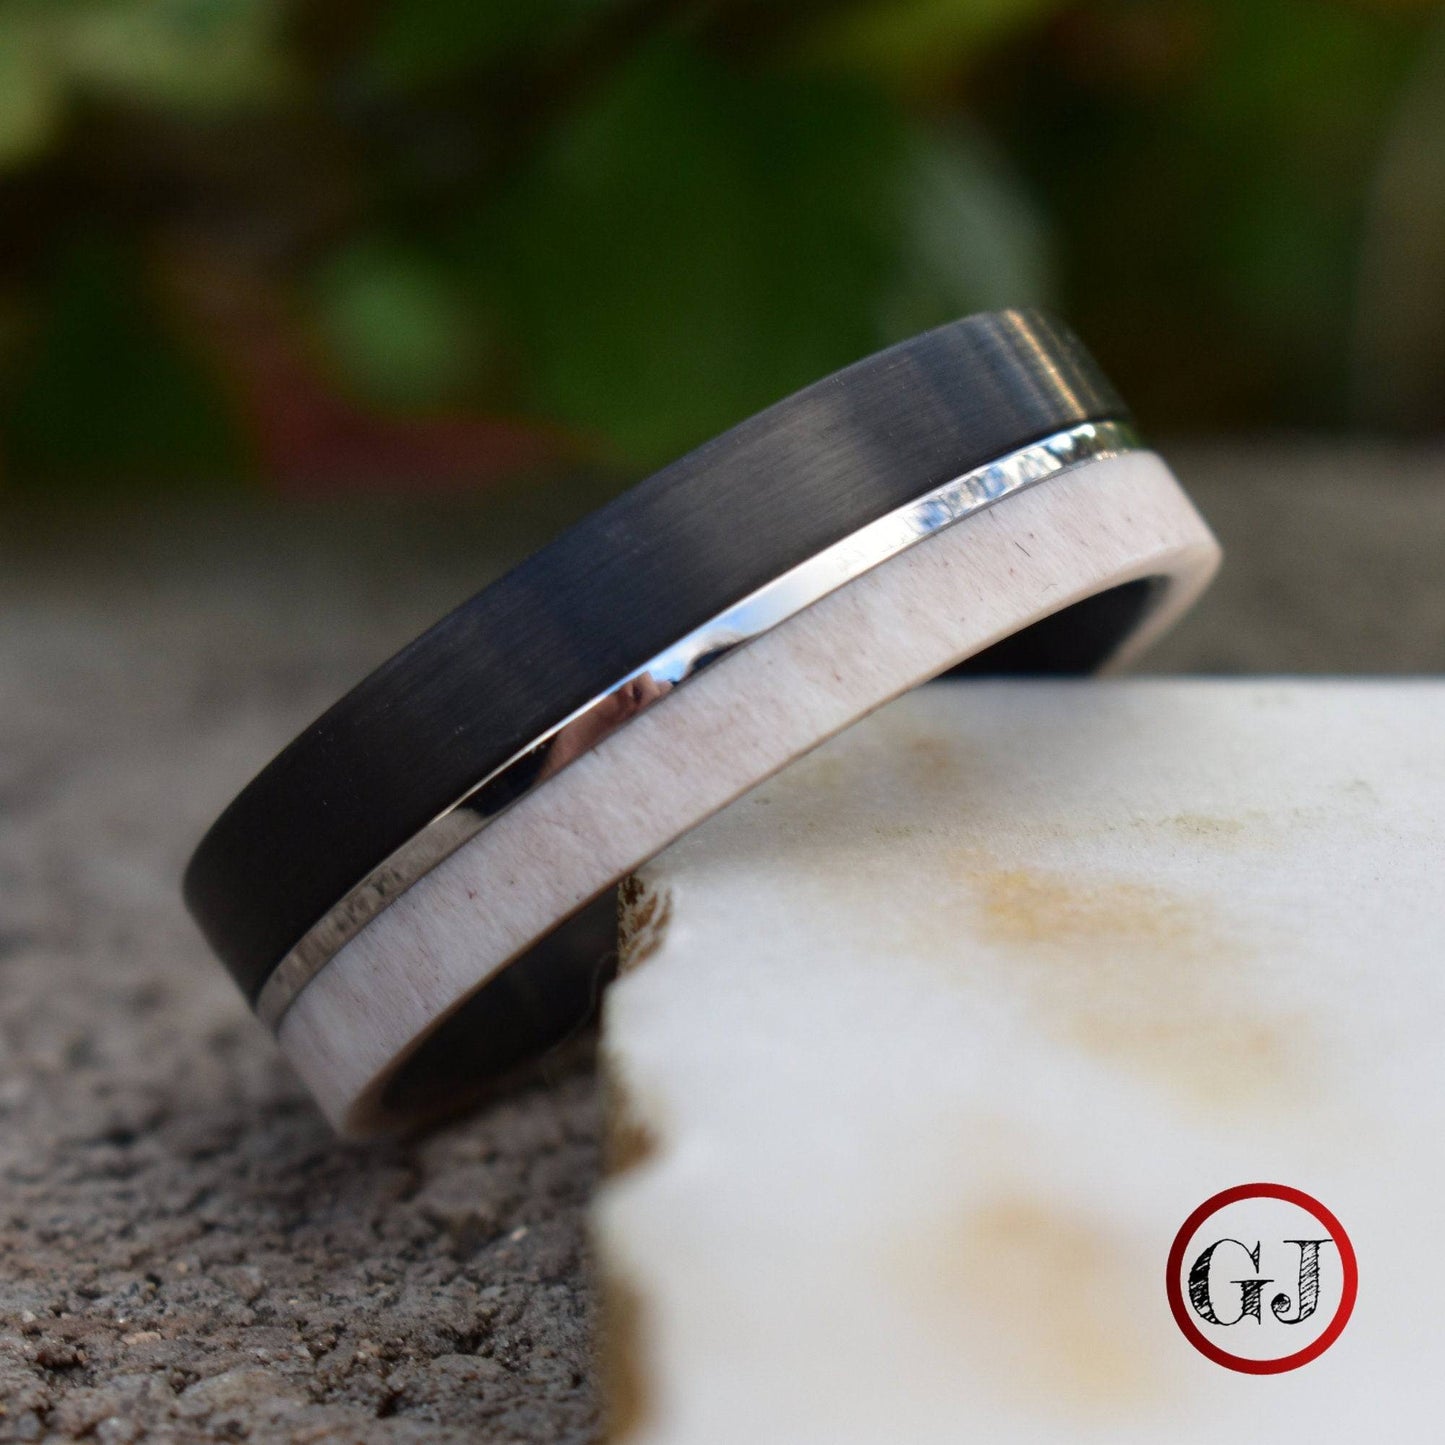 Deer Antler and Brushed Black Tungsten Ring with Polished Silver Tungsten Center - Tungsten Titans